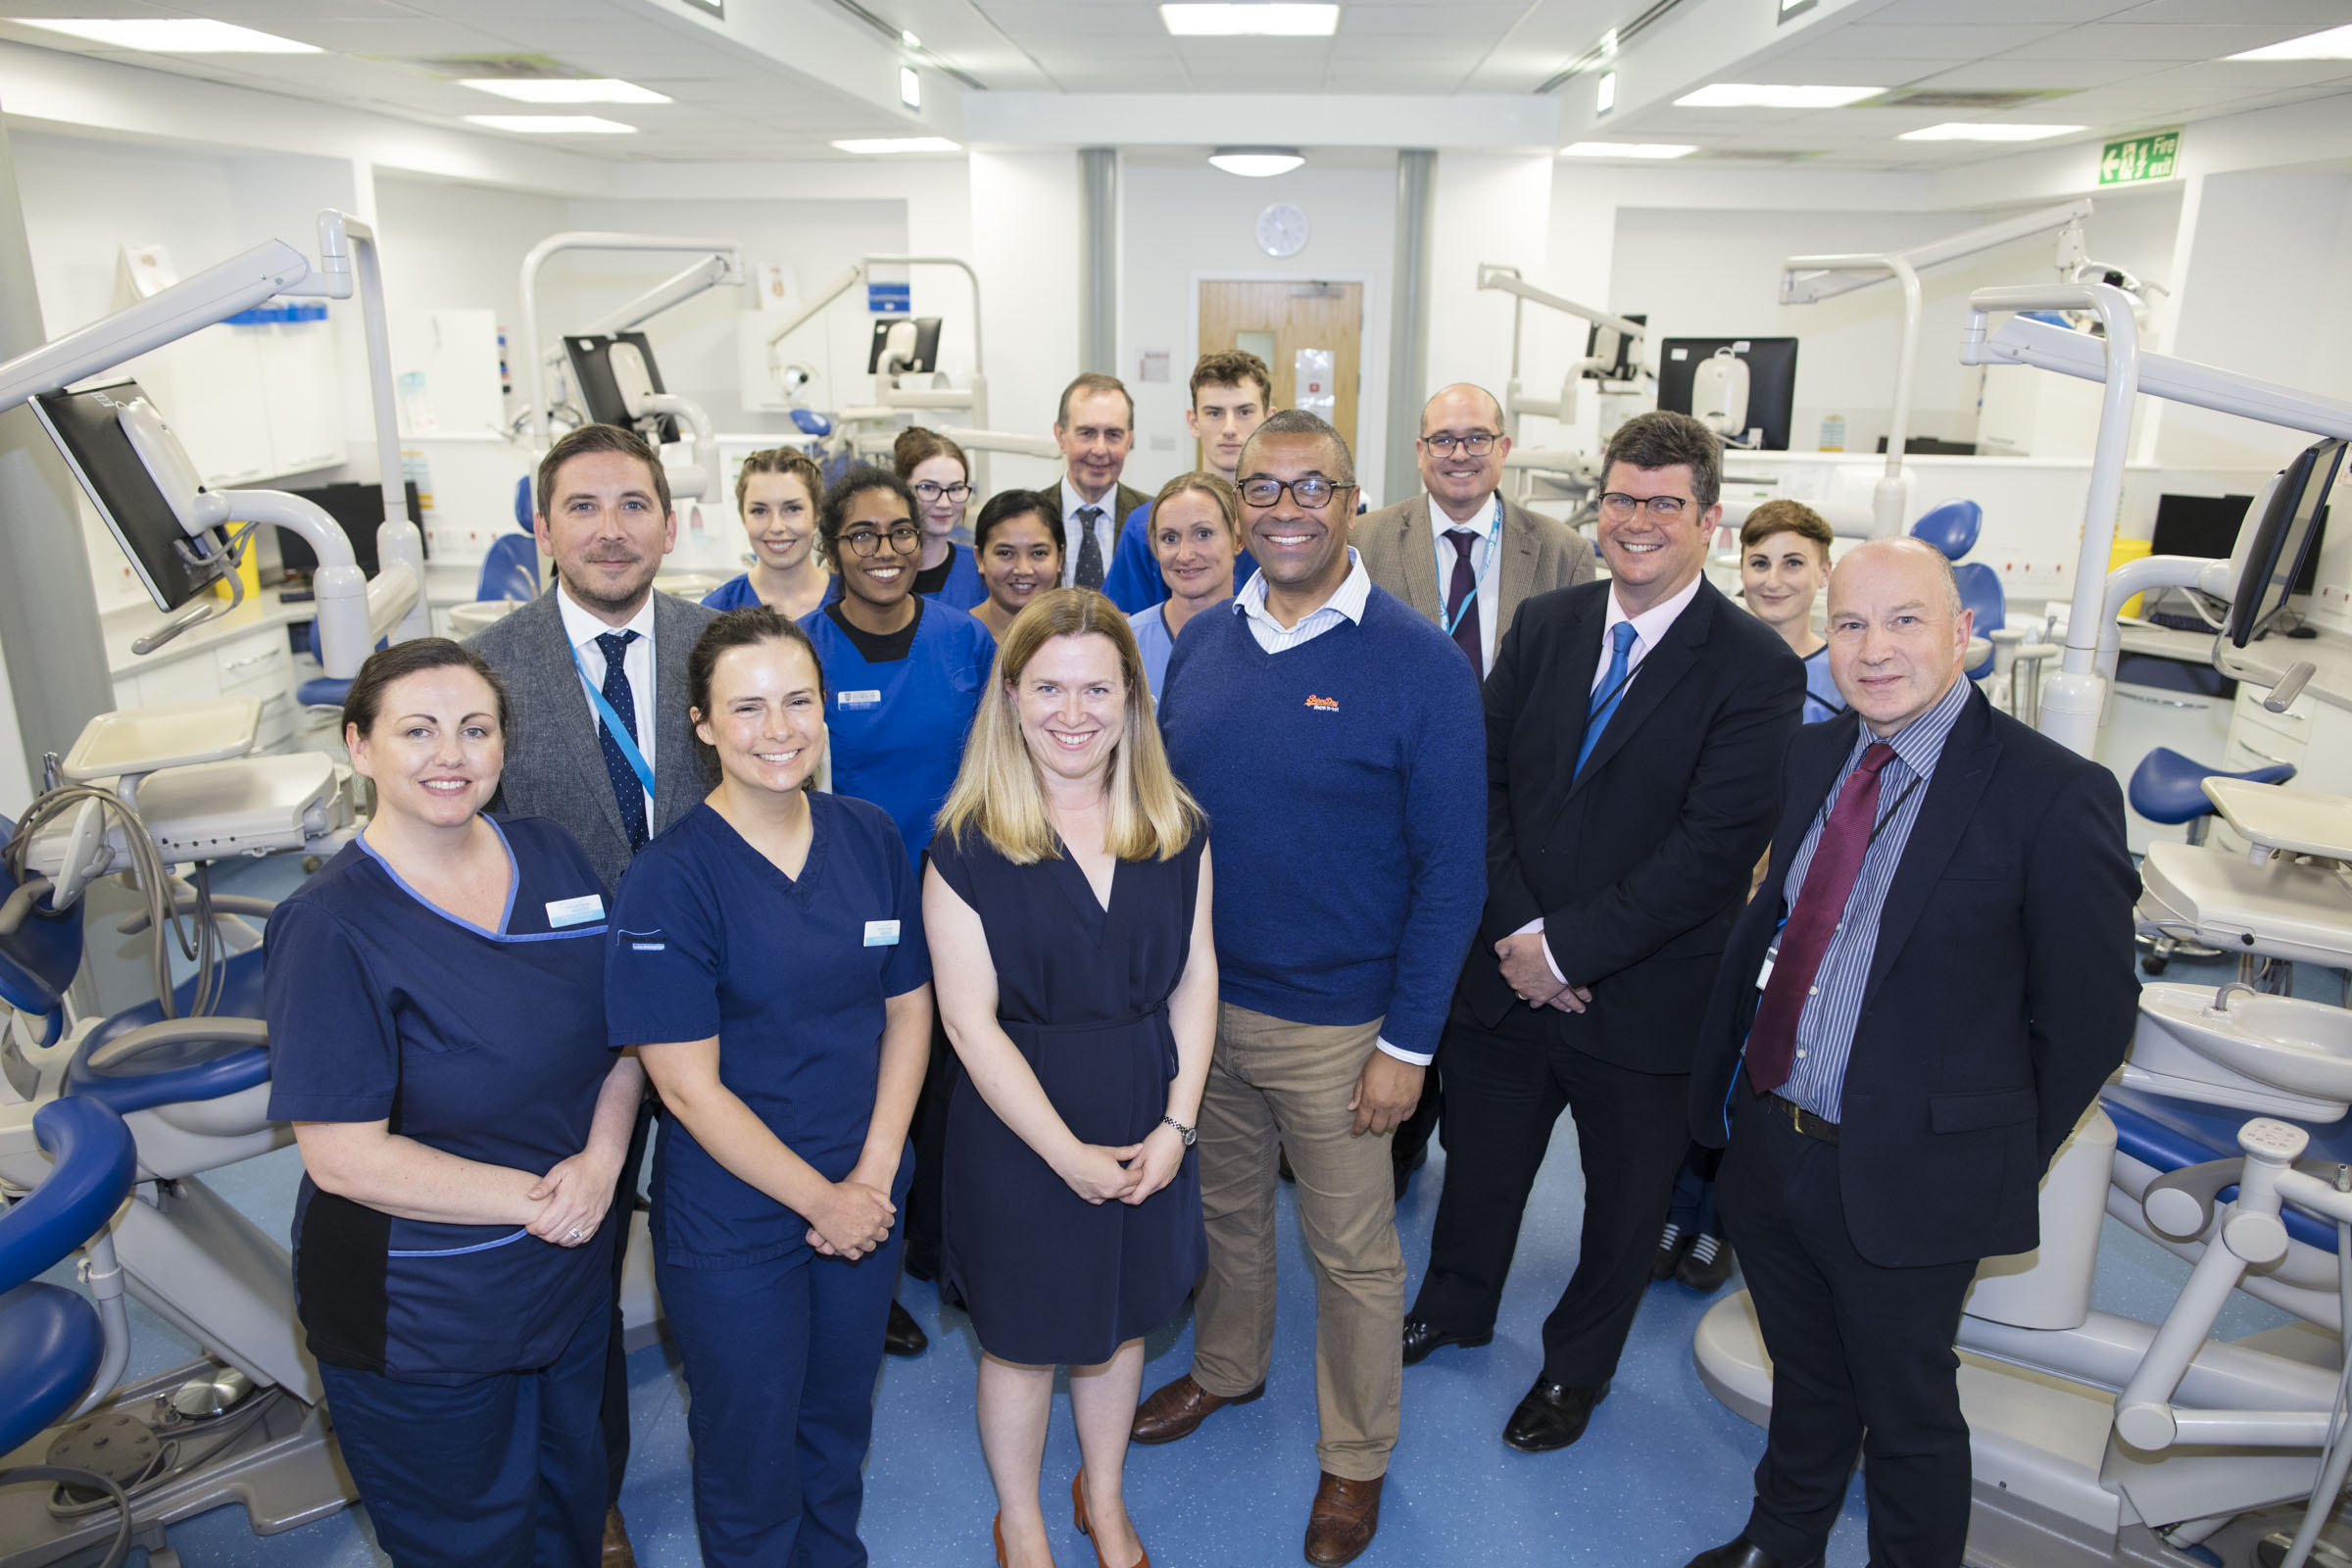 MP James Cleverley at the University of Plymouth dental school